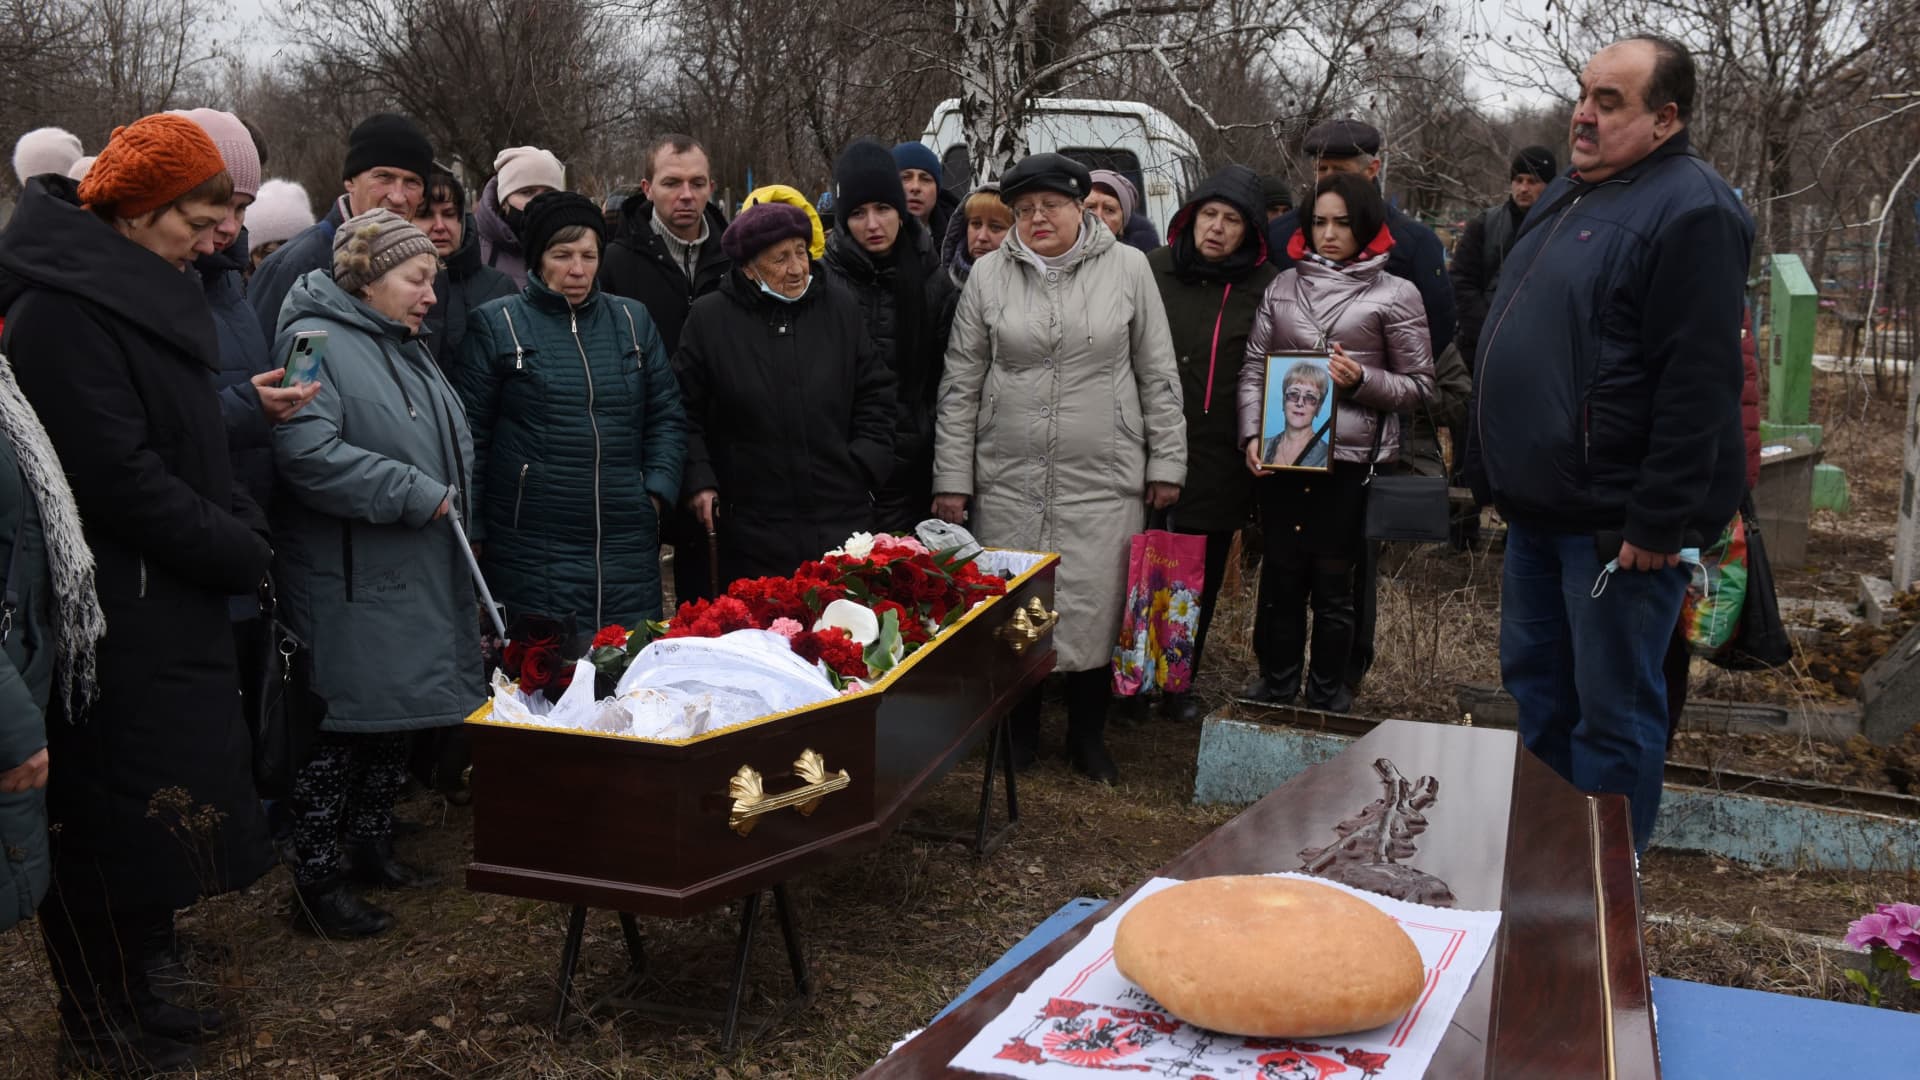 People stand near the coffin during a funeral of school teachers Yelena Ivanova and Yelena Kudrik, who were killed by shelling, at a cemetery in the separatist-controlled town of Horlivka (Gorlovka) in the Donetsk region, Ukraine, February 28, 2022.